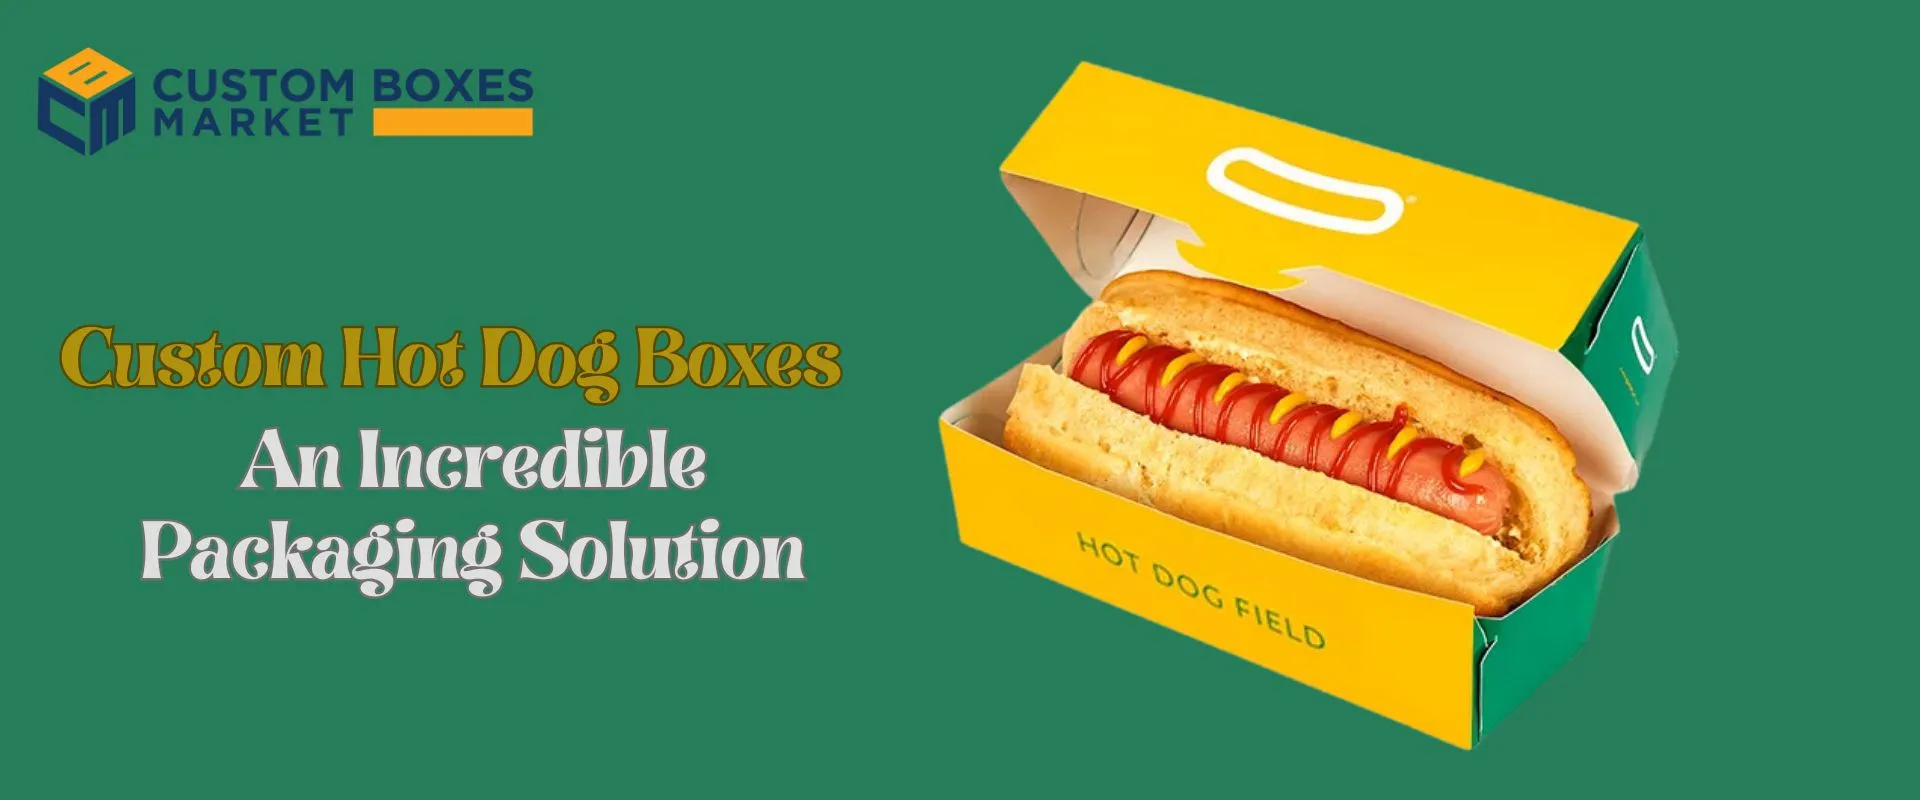 Custom Hot Dog Boxes: An Incredible Packaging Solution